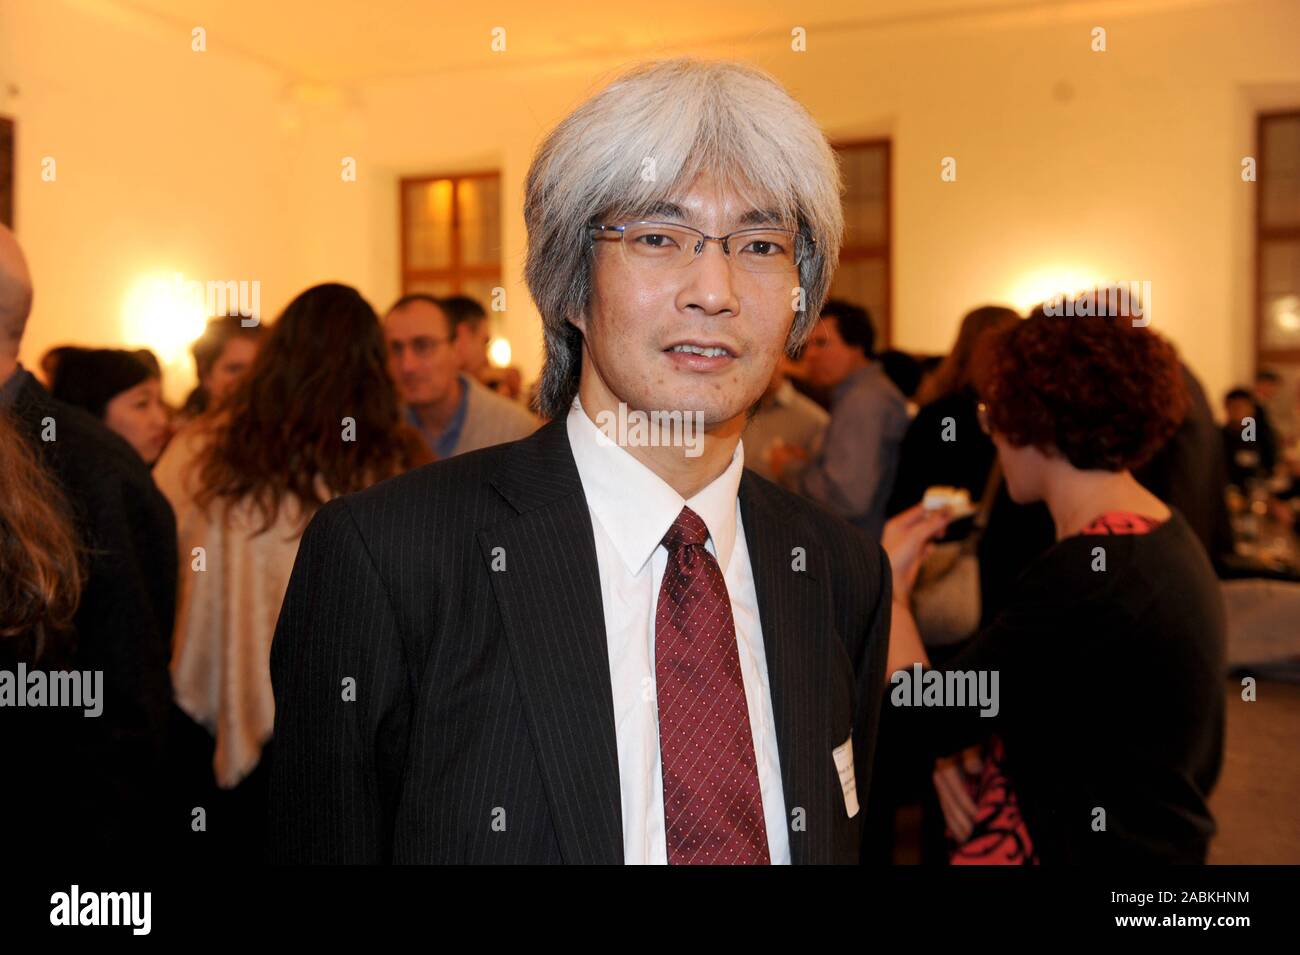 Reception of the City of Munich for 'International Guest Researchers' in the hall of the Old Town Hall. Yoshihiva Kanamaru, scientist at the Ludwig Maximilian University (LMU), Japan. [automated translation] Stock Photo